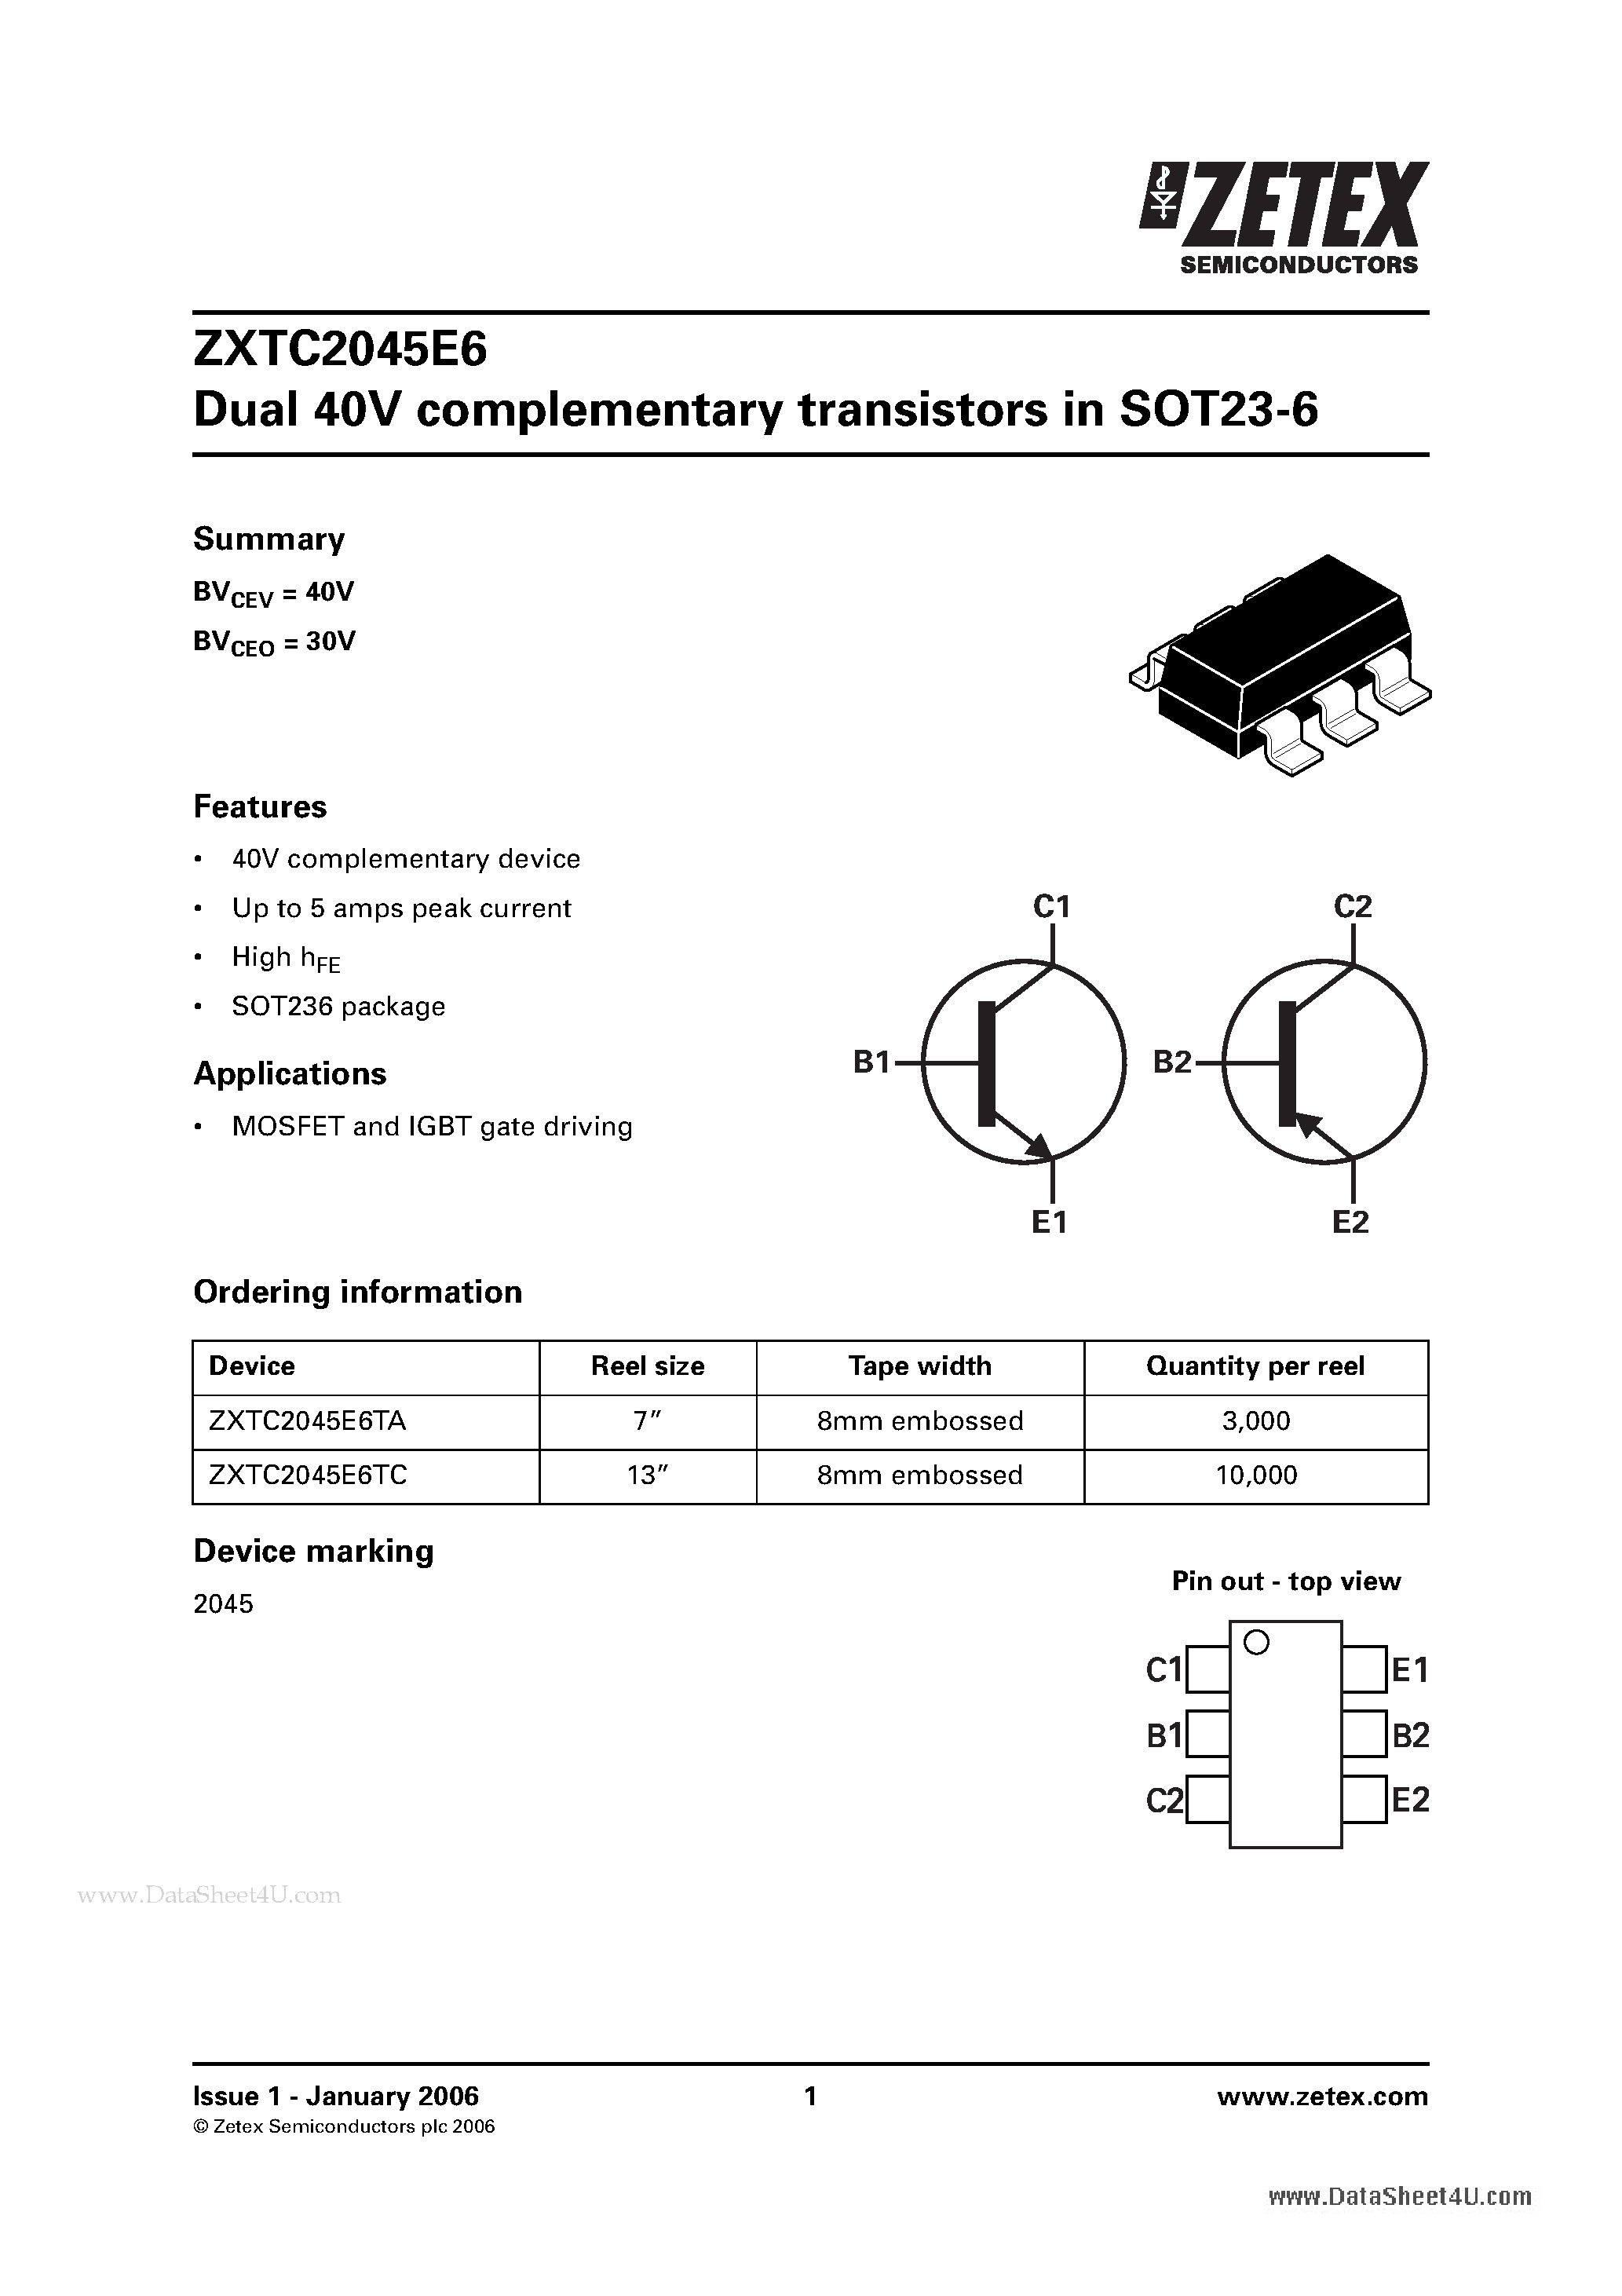 Datasheet ZXTC2045E6 - Dual 40V complementary transistors page 1